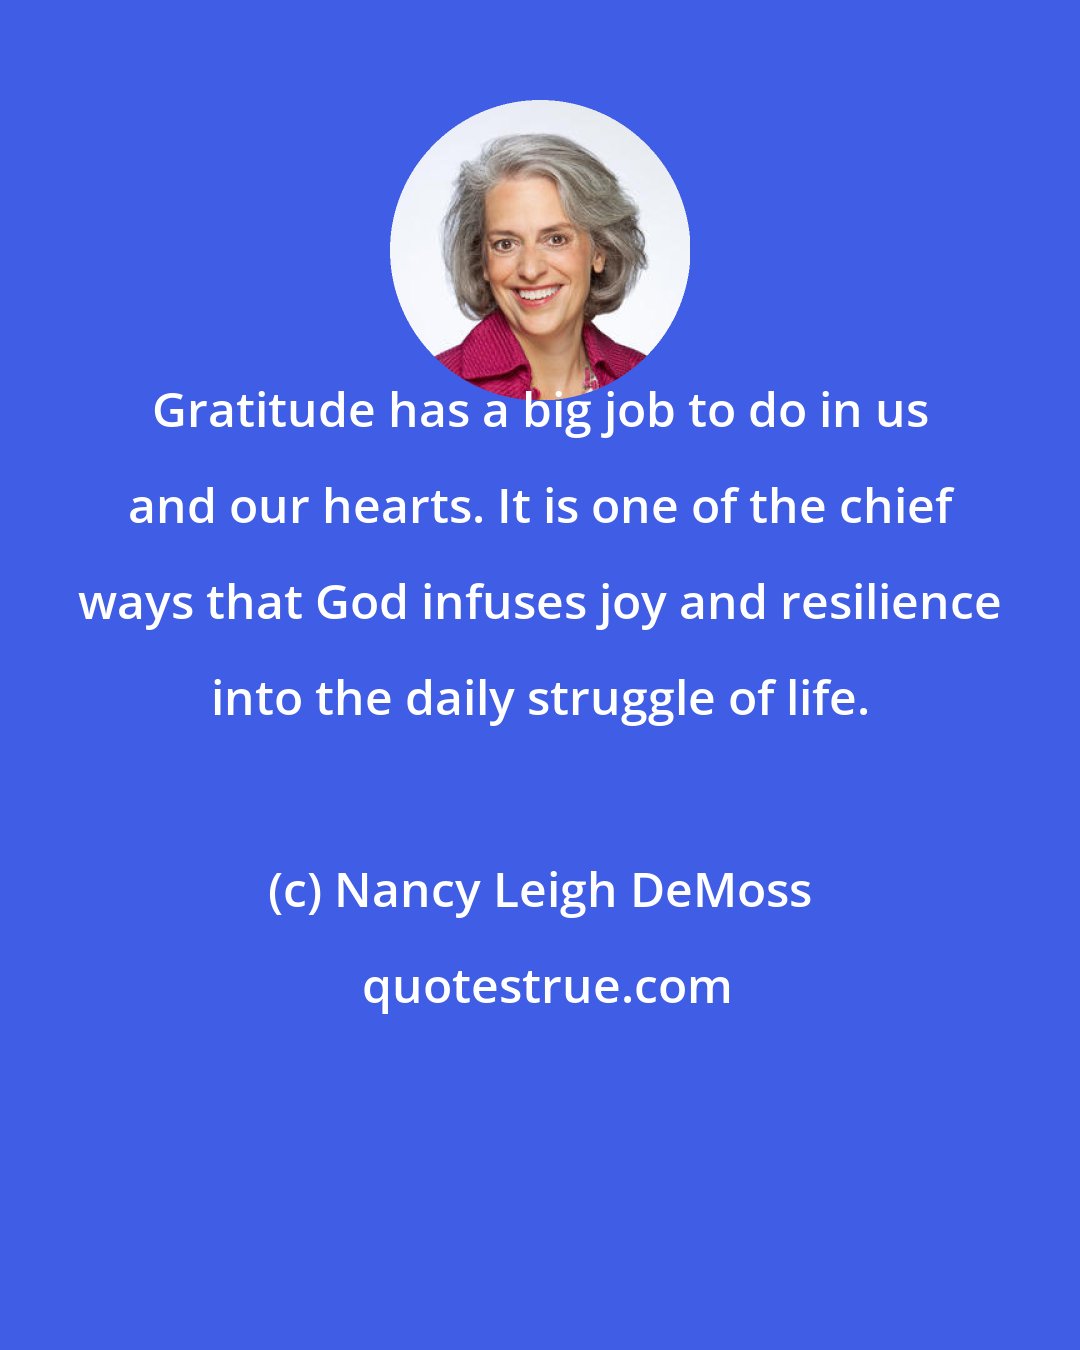 Nancy Leigh DeMoss: Gratitude has a big job to do in us and our hearts. It is one of the chief ways that God infuses joy and resilience into the daily struggle of life.